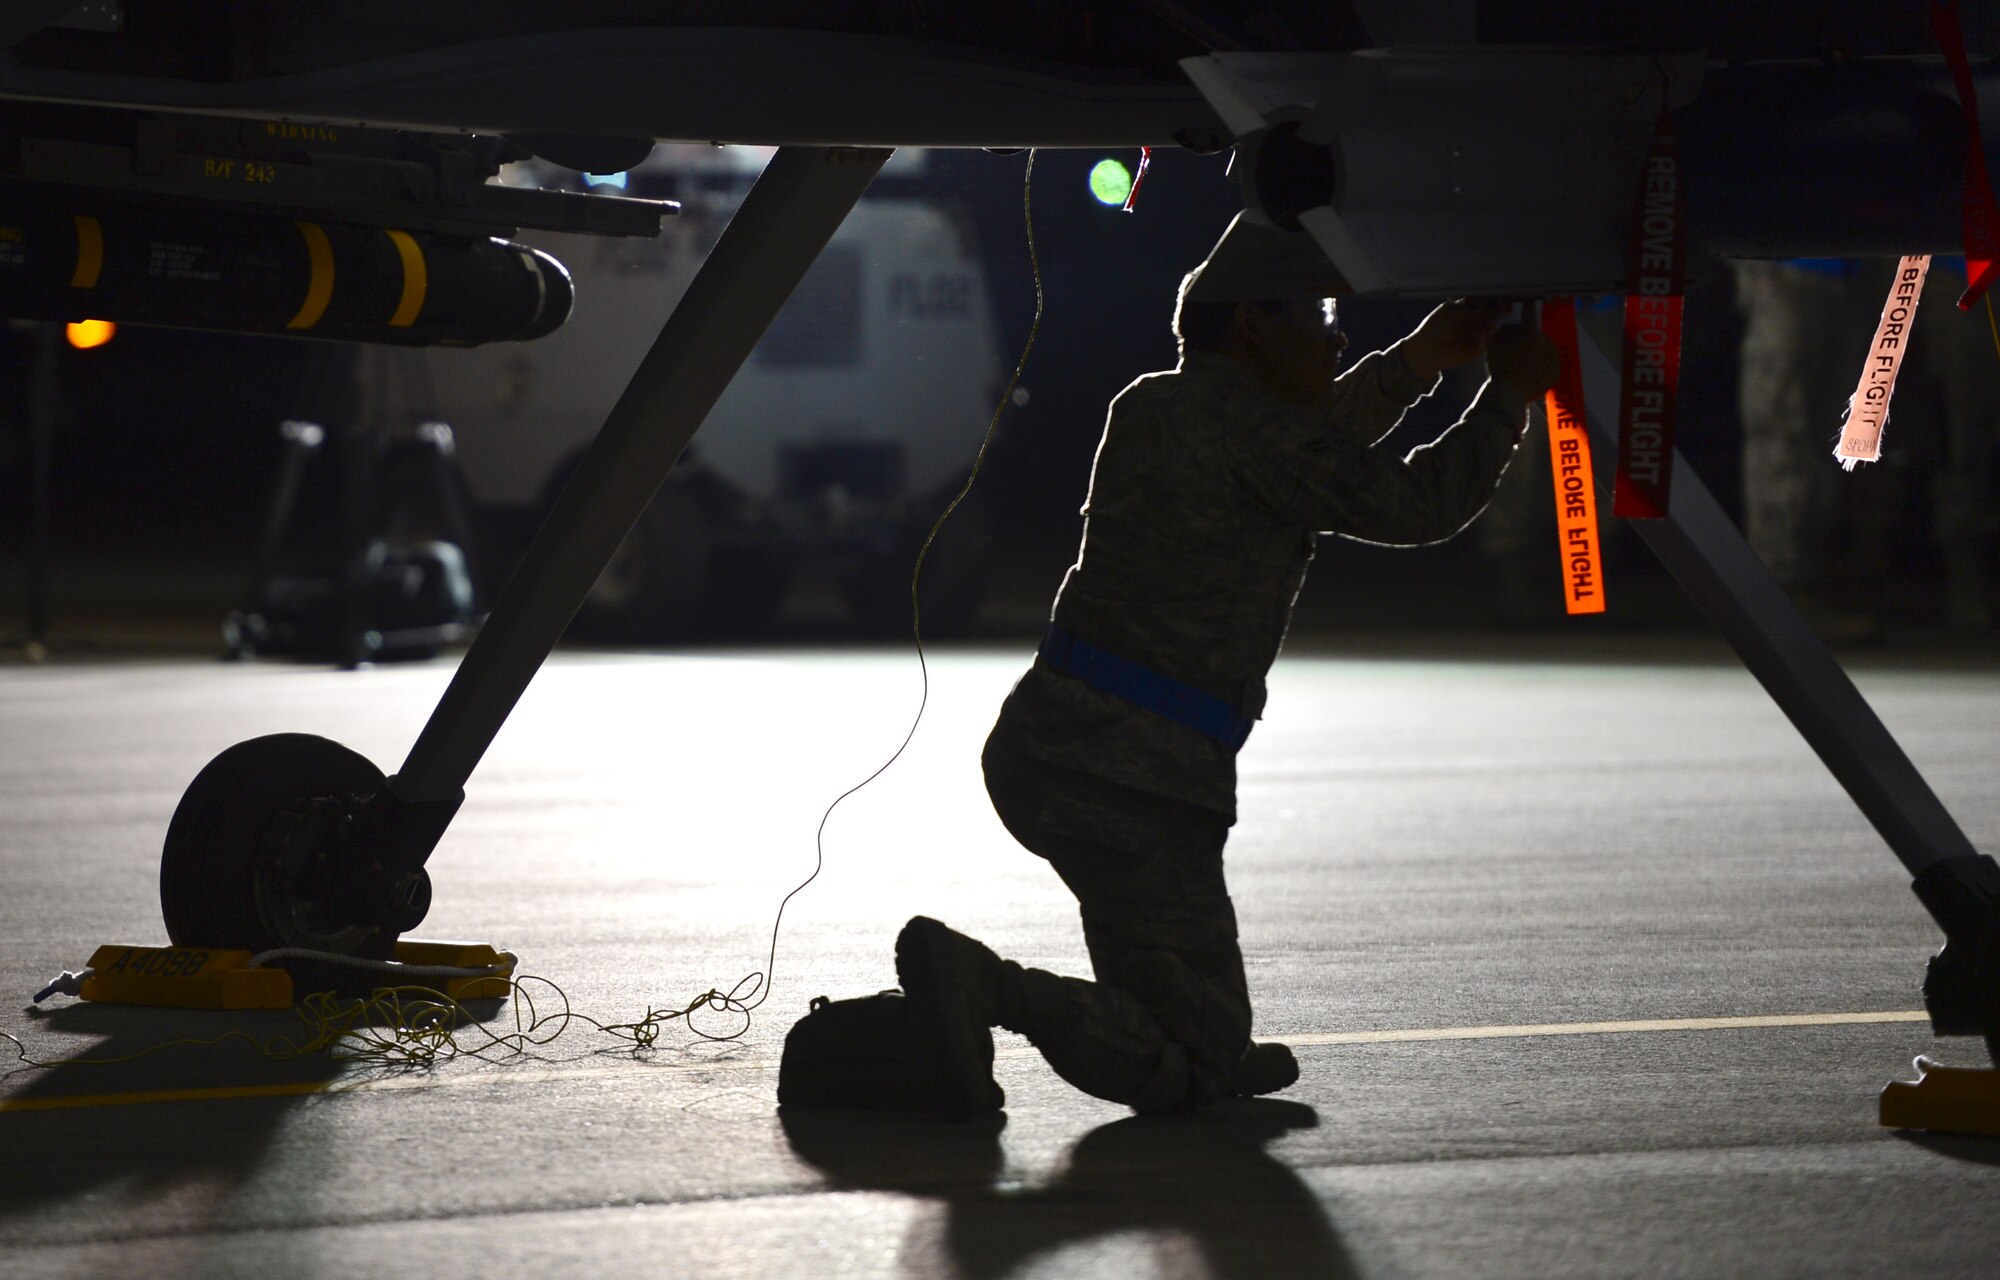 An Airmen assigned to the 432nd Maintenance Group, performs maintenance on an MQ-9 Reaper prior to a launch at Creech Air Force Base, Nev., May 12, 2014. The 432nd Maintenance Group has continuously exceeded the RPA standard mission capable rate of 86 percent set by Air Combat Command through sound maintenance practices. Mission capable means the aircraft has no supply or maintenance issues preventing it from successfully completing a mission. (U.S Air Force photo by Staff Sgt. N.B./Released)